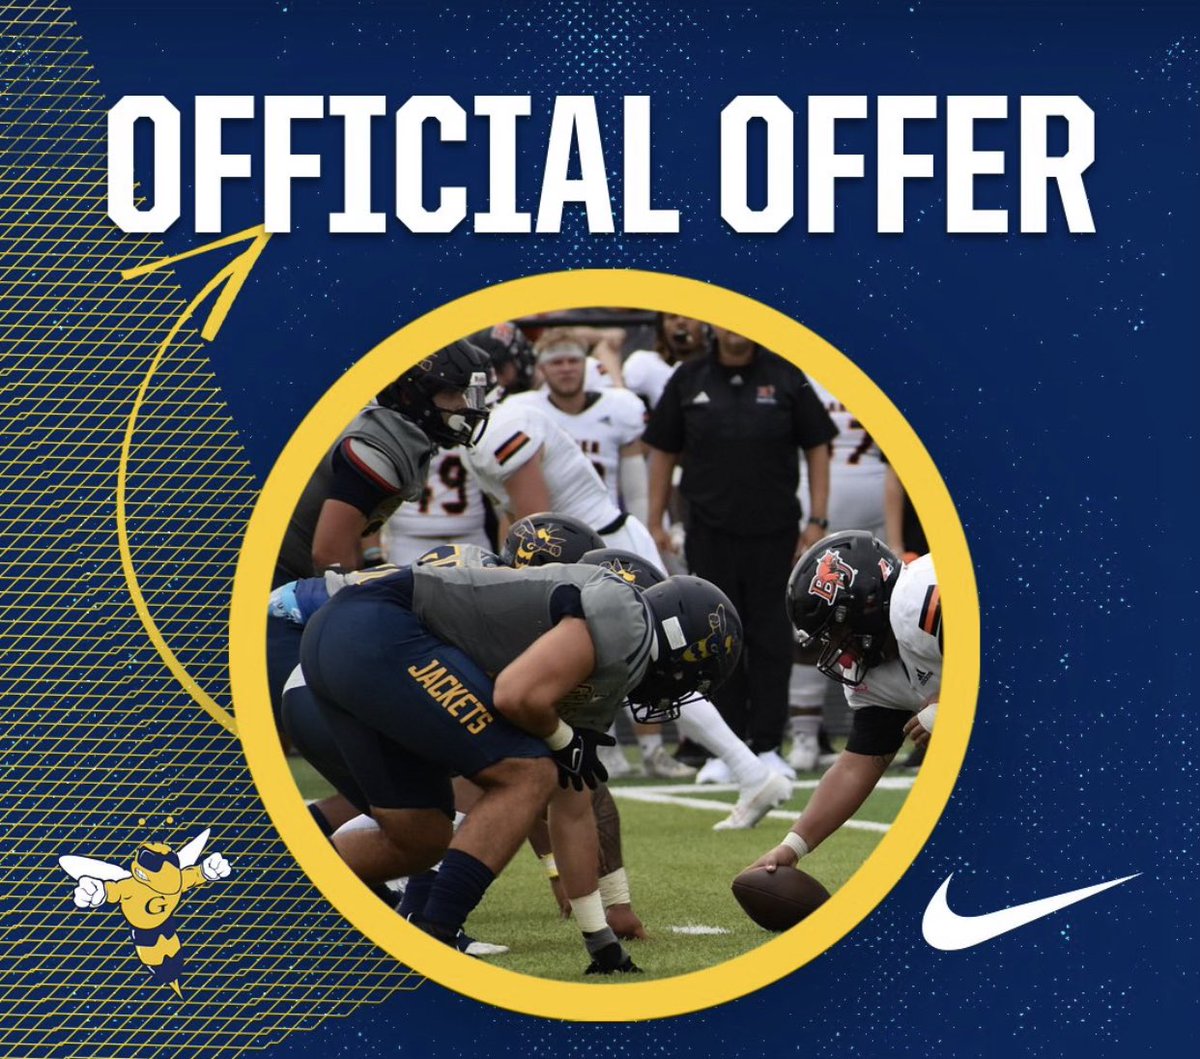 #AGTG I am blessed to receive a offer to Graceland @CoachRodRyles